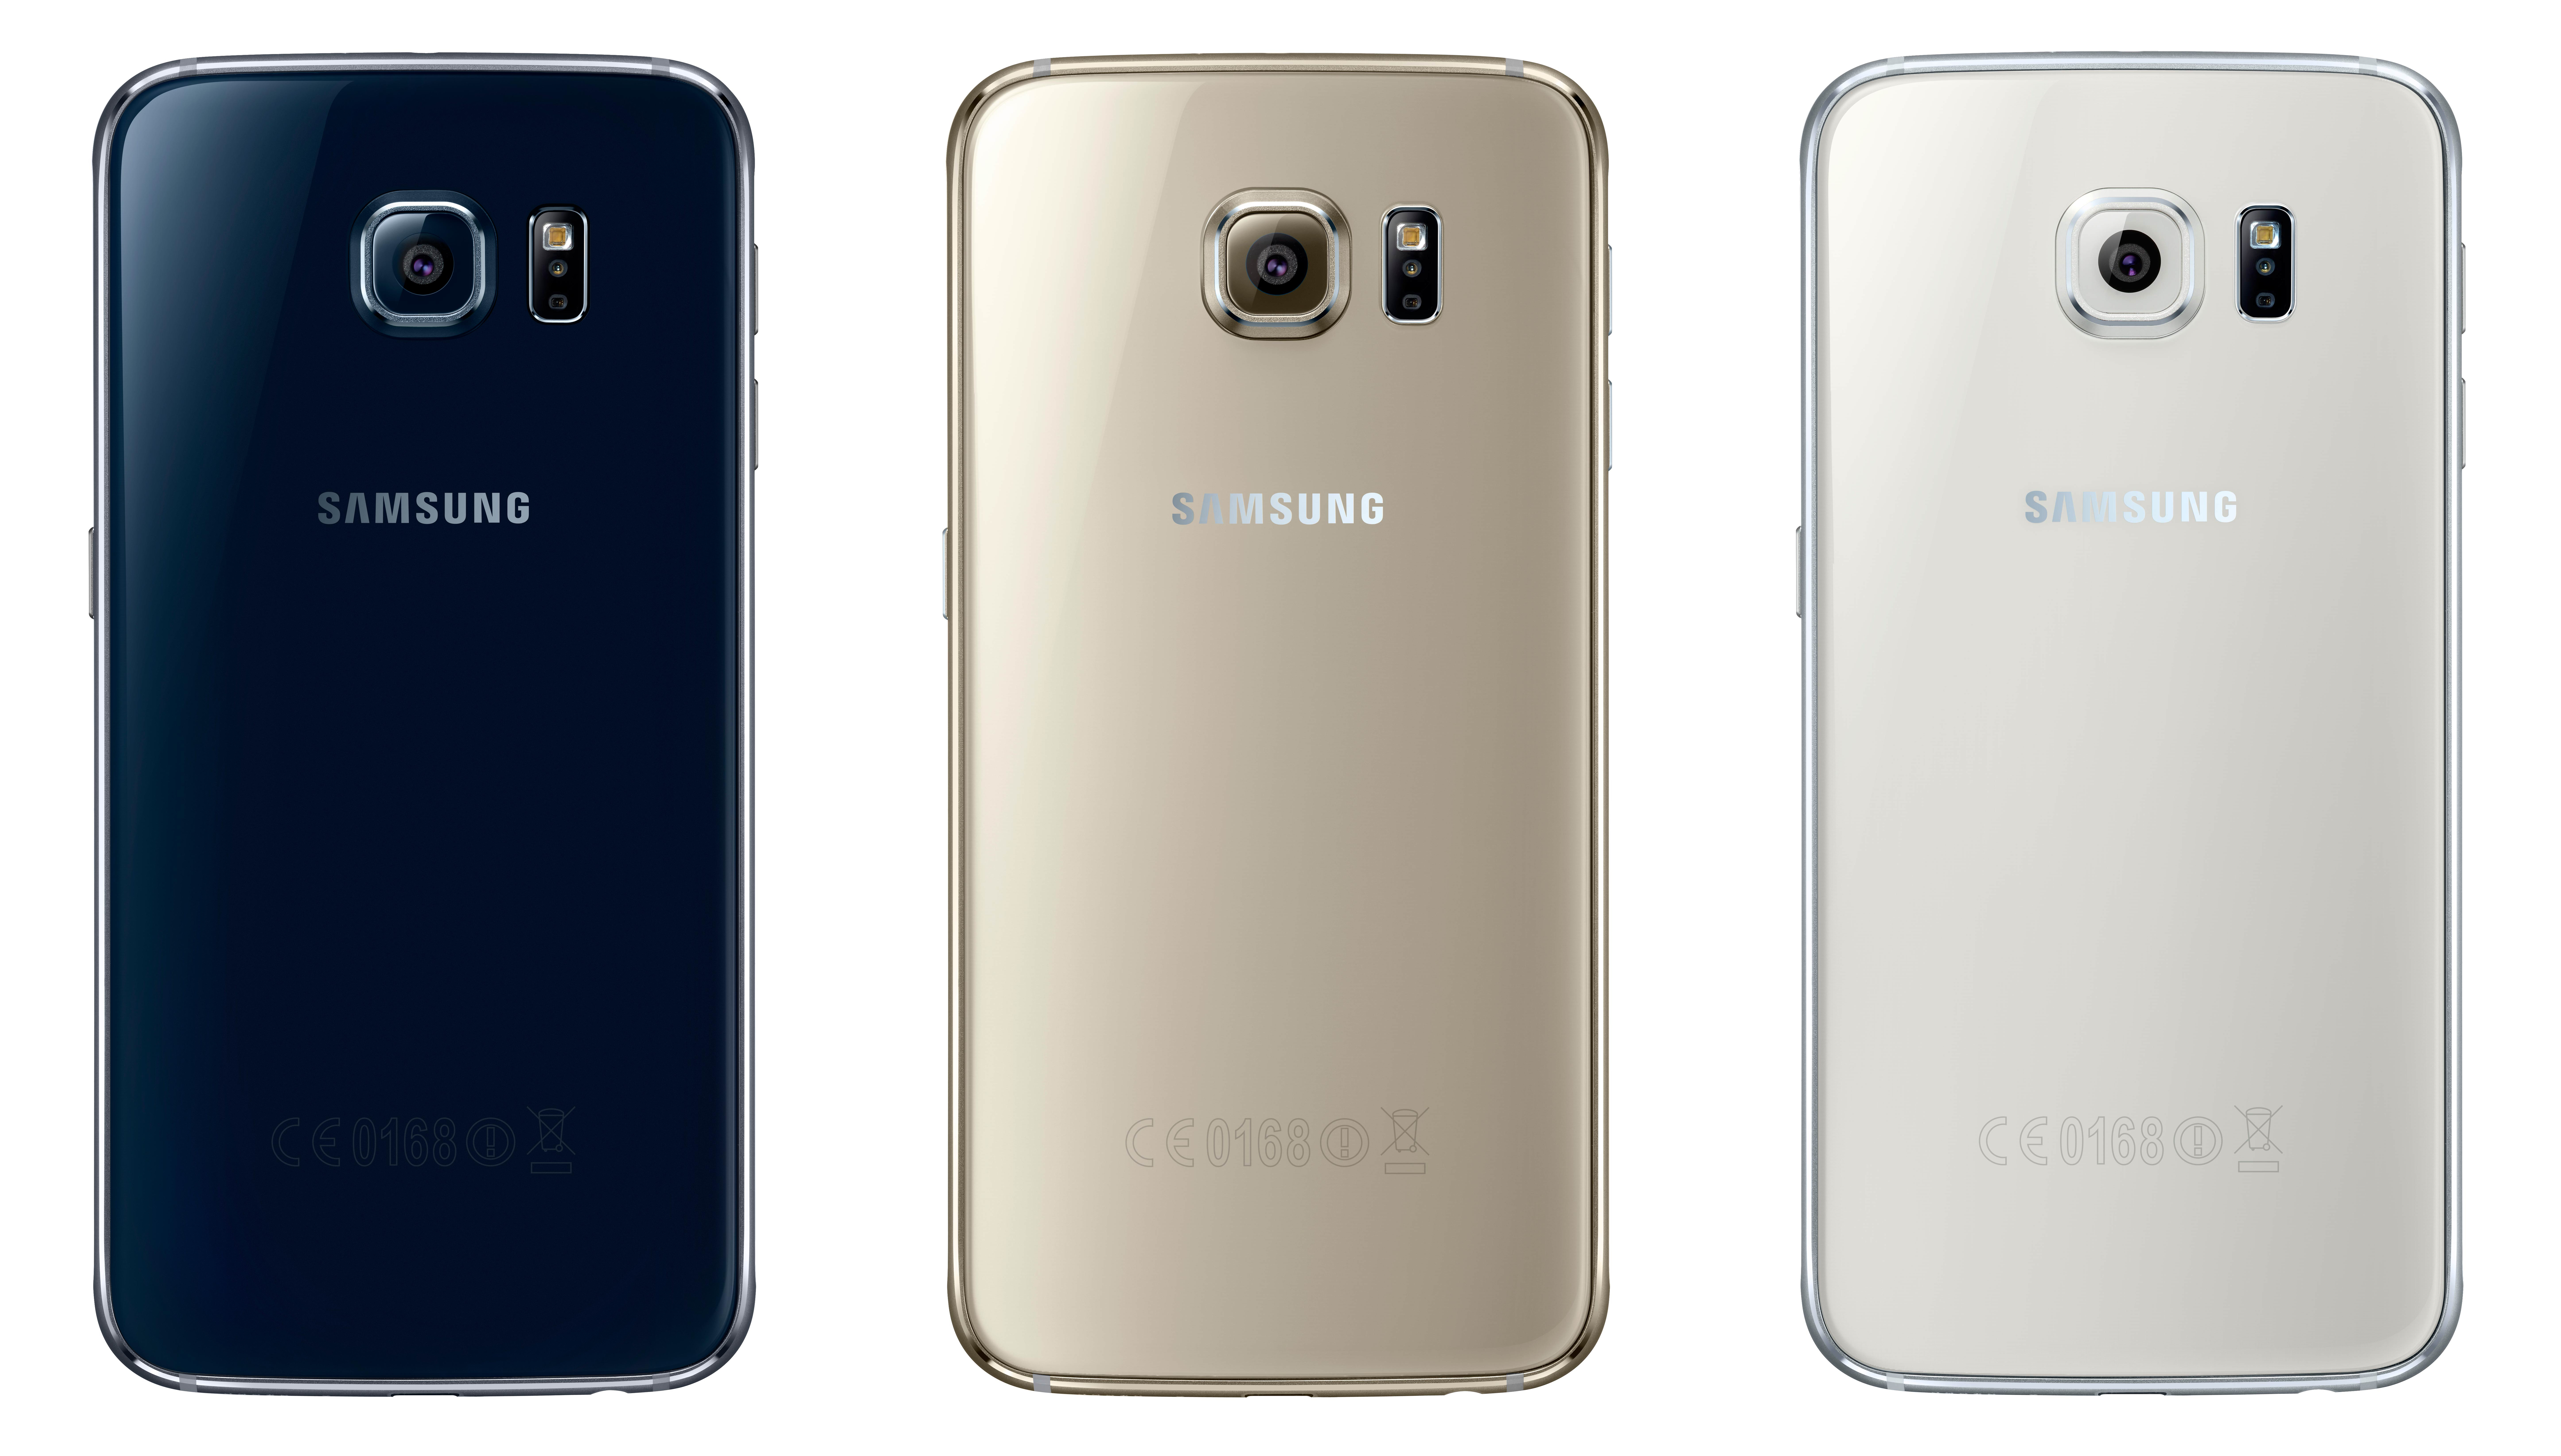 Here's the help you need top pick the best Galaxy S6 color option for you.